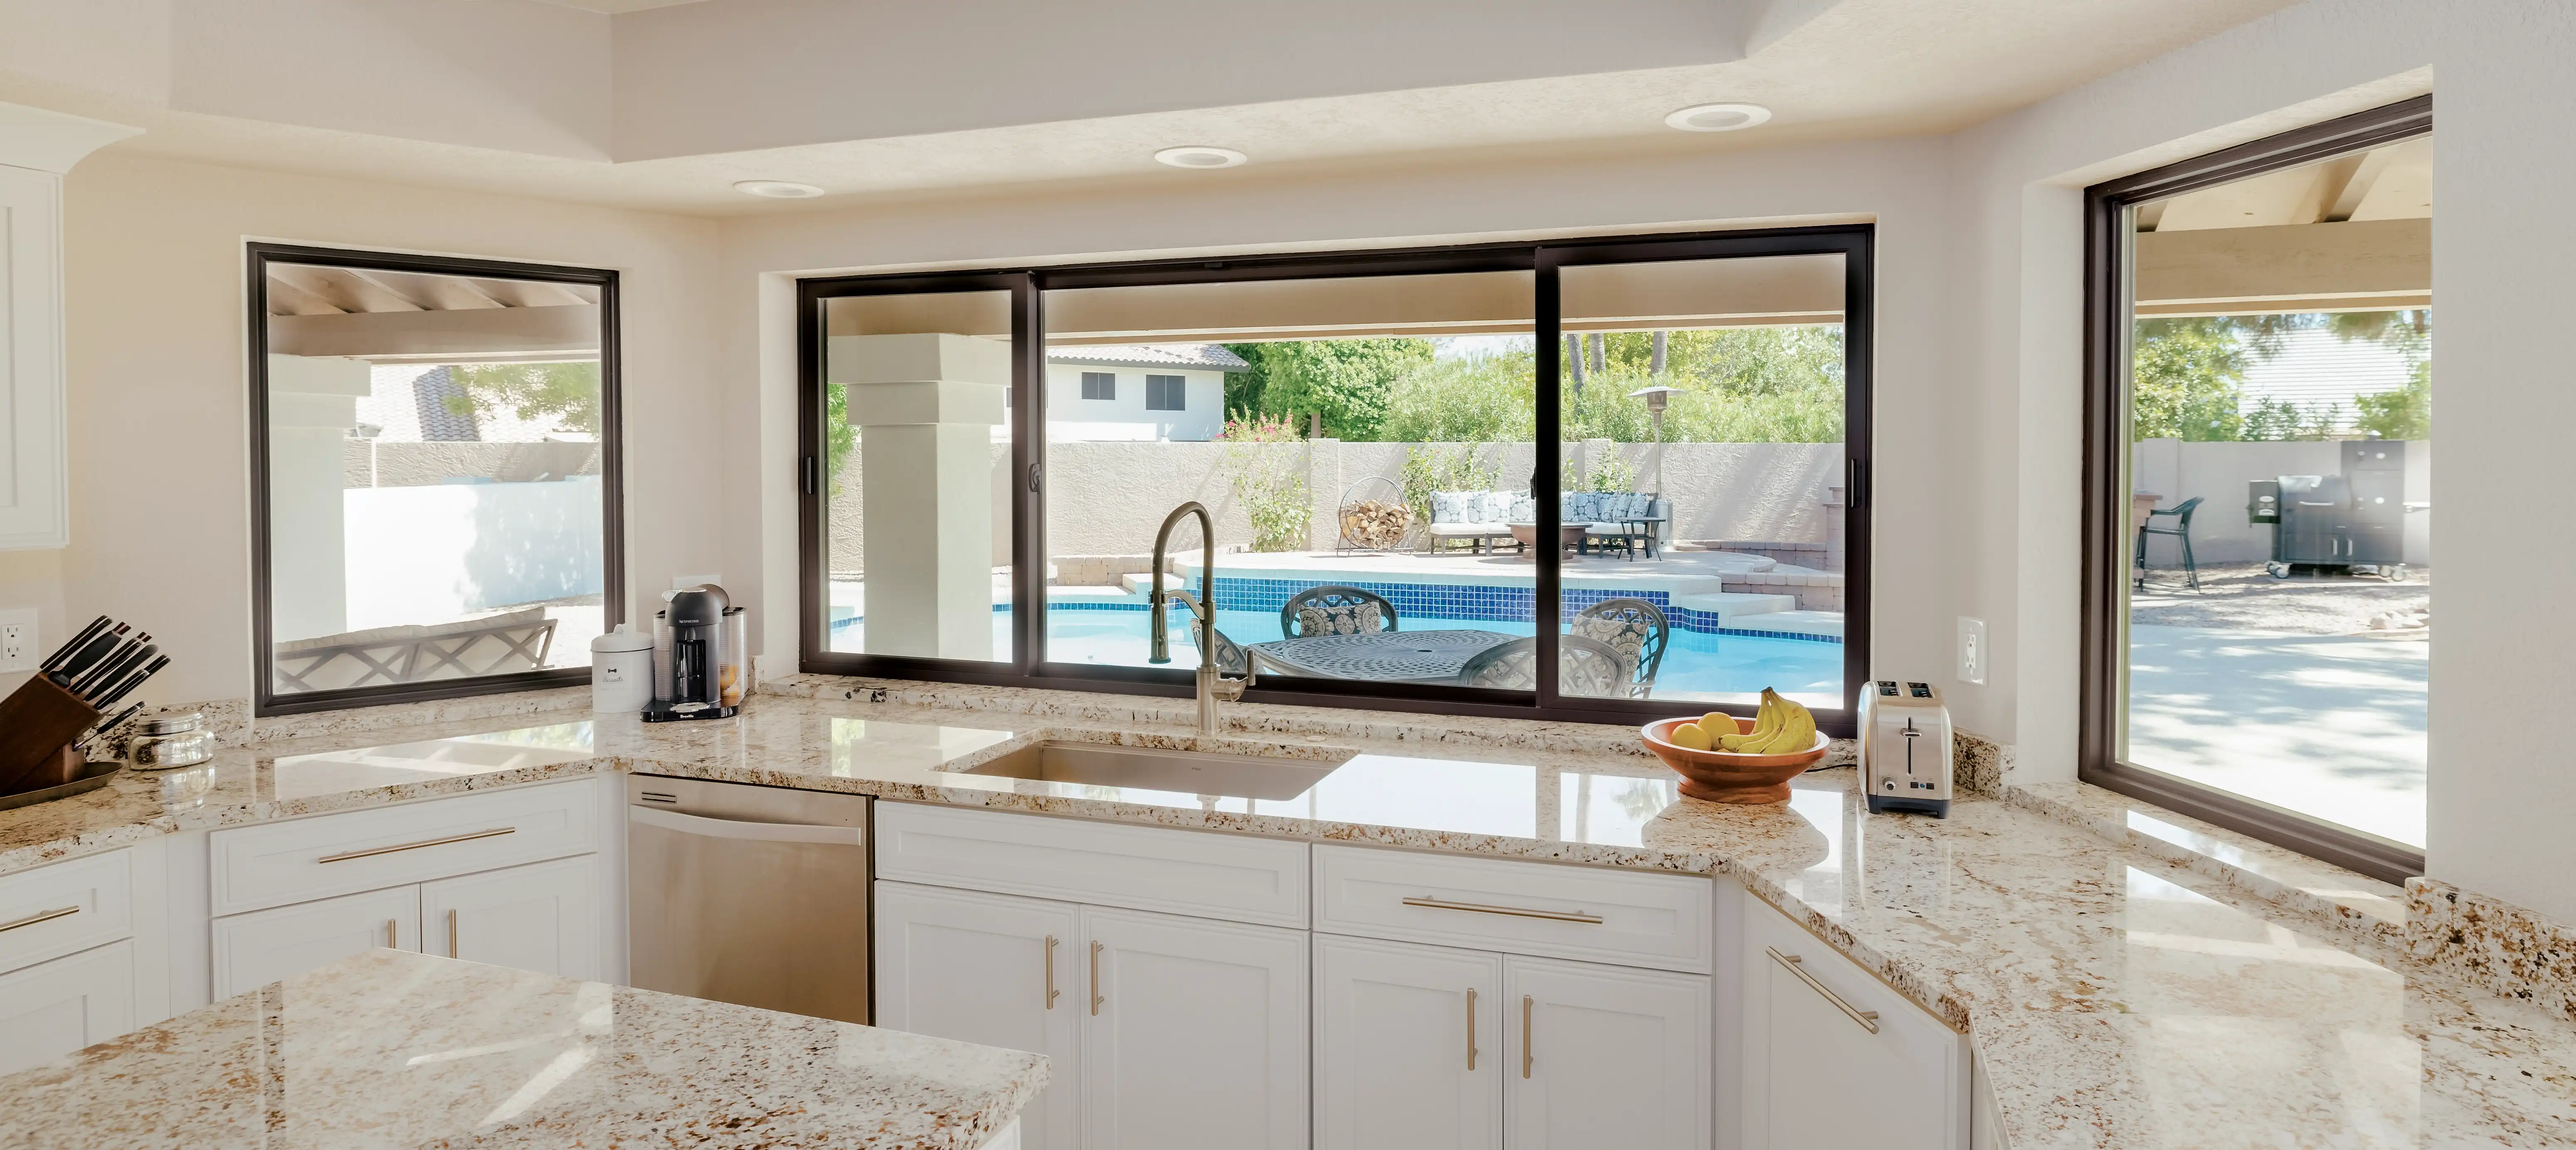 Interior view of Marvin Replacement Slider picture window overlooking an outdoor pool.